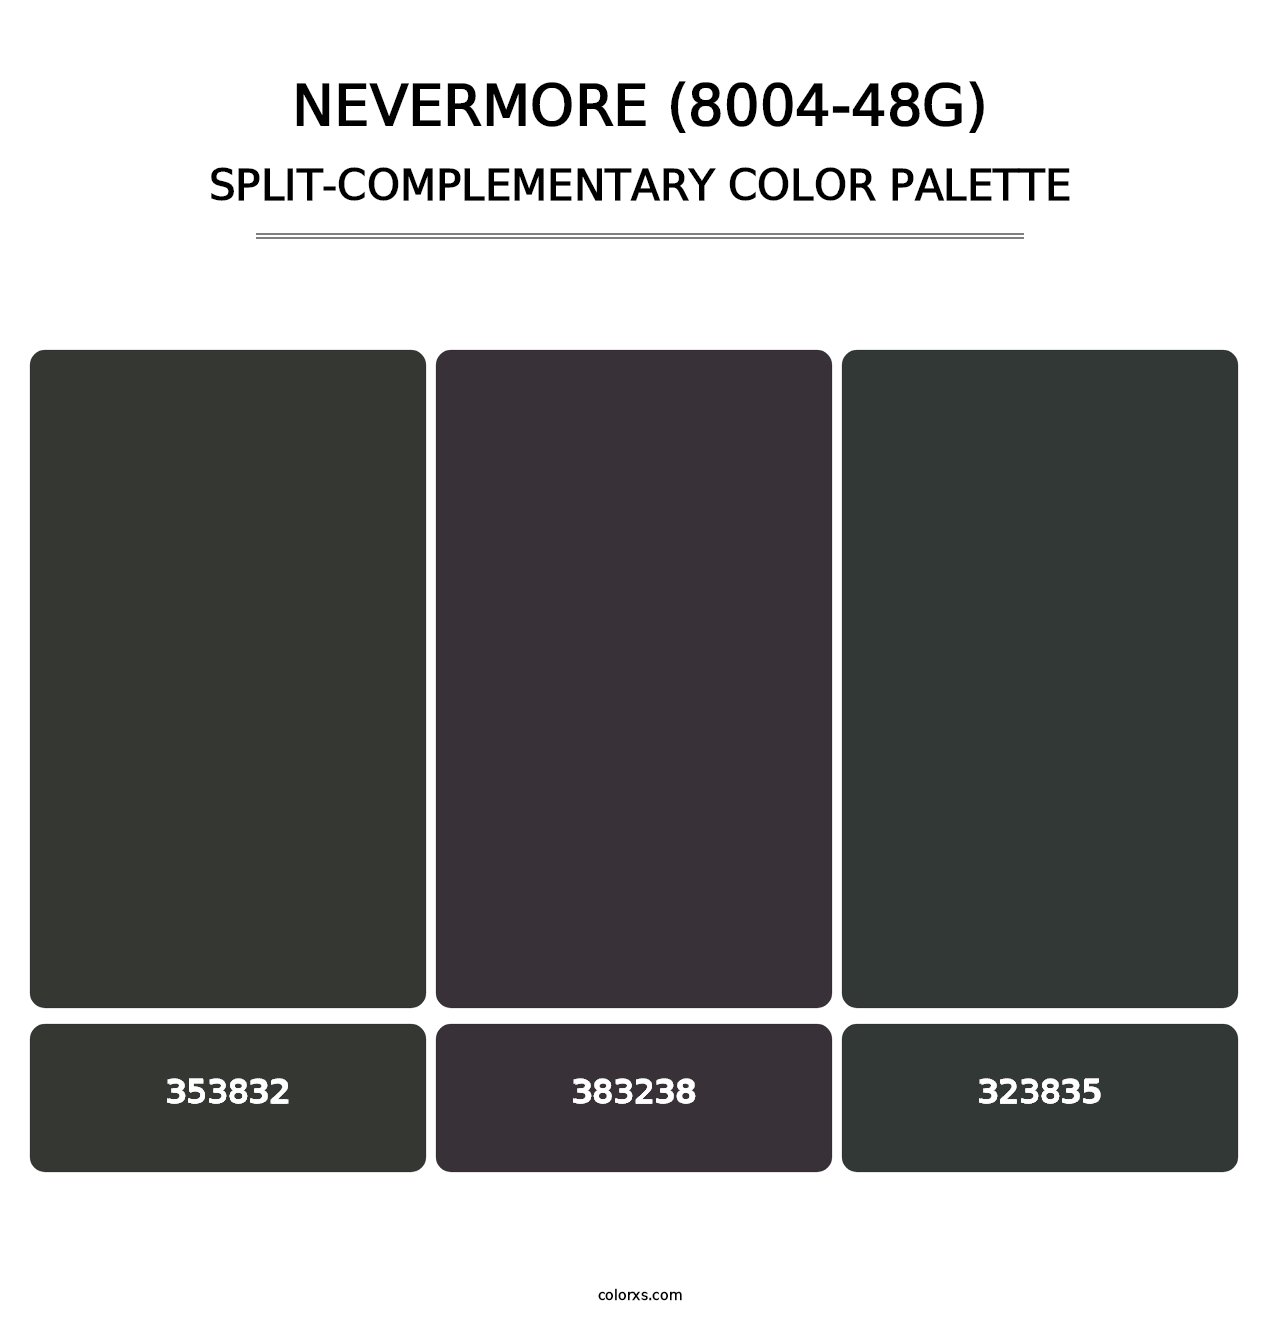 Nevermore (8004-48G) - Split-Complementary Color Palette